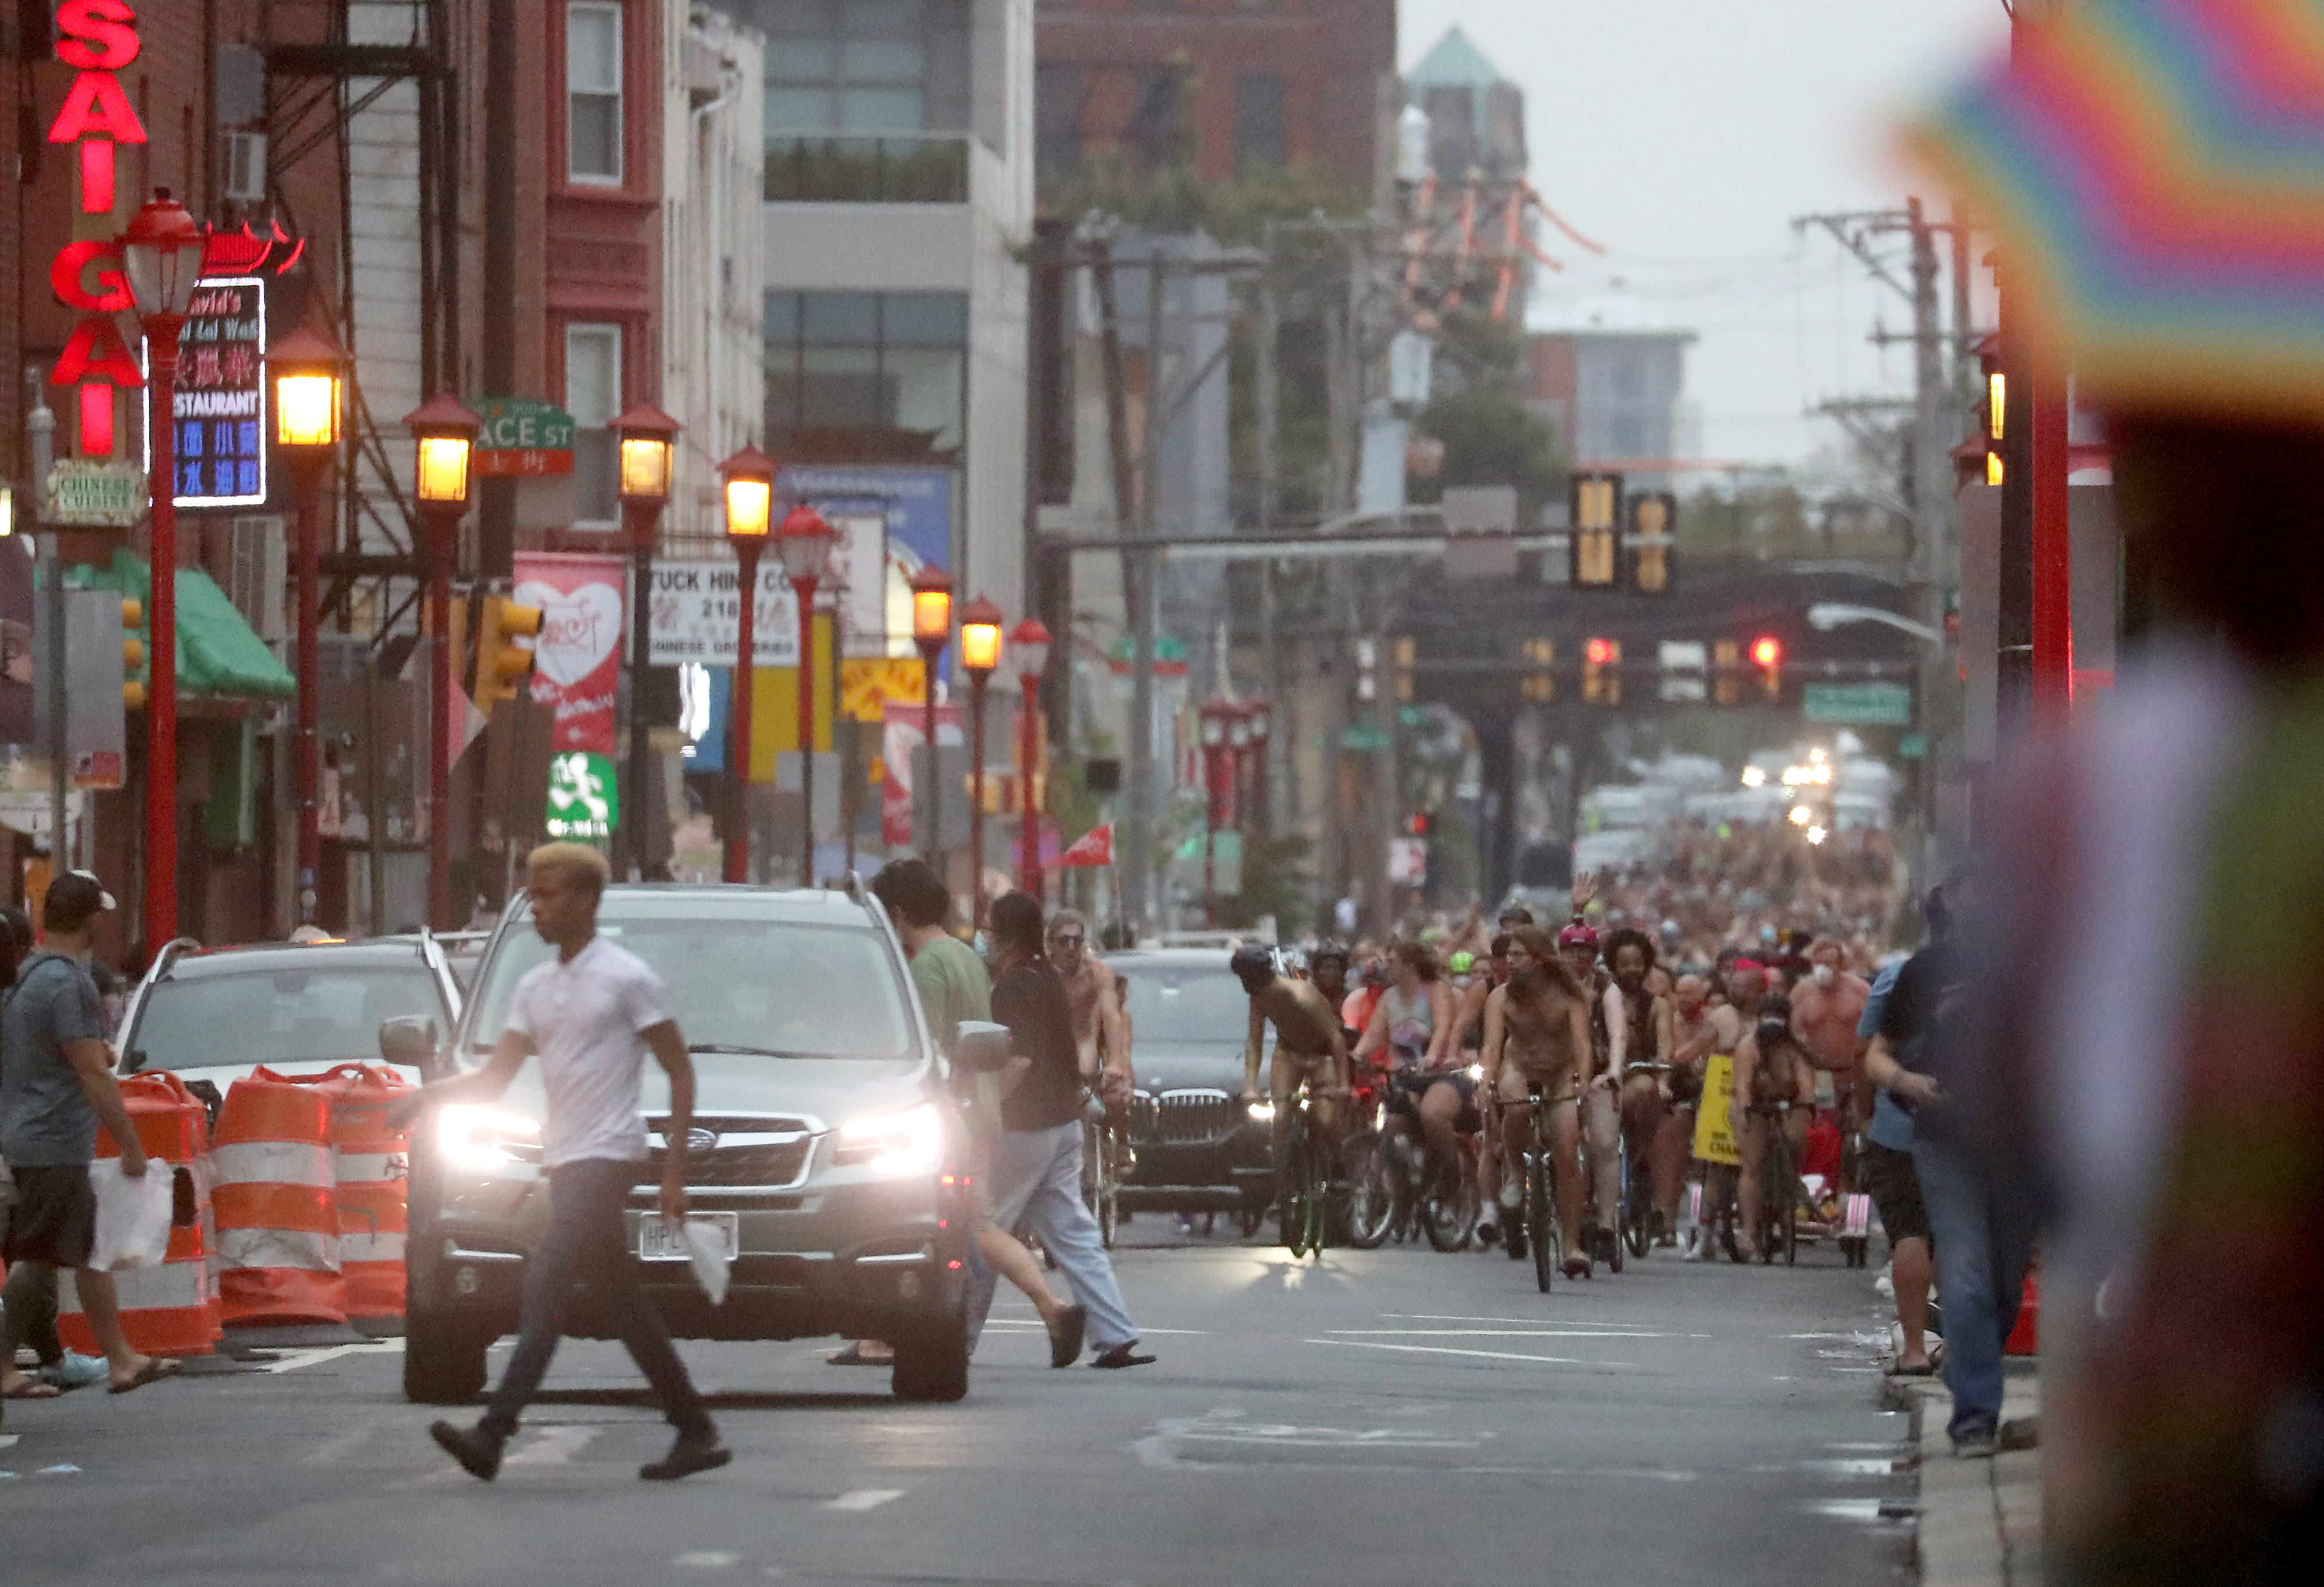 People ride bikes along 10th Street in Philadelphia during the Philly Naked Bike Ride, Saturday, Aug. 28, 2021.